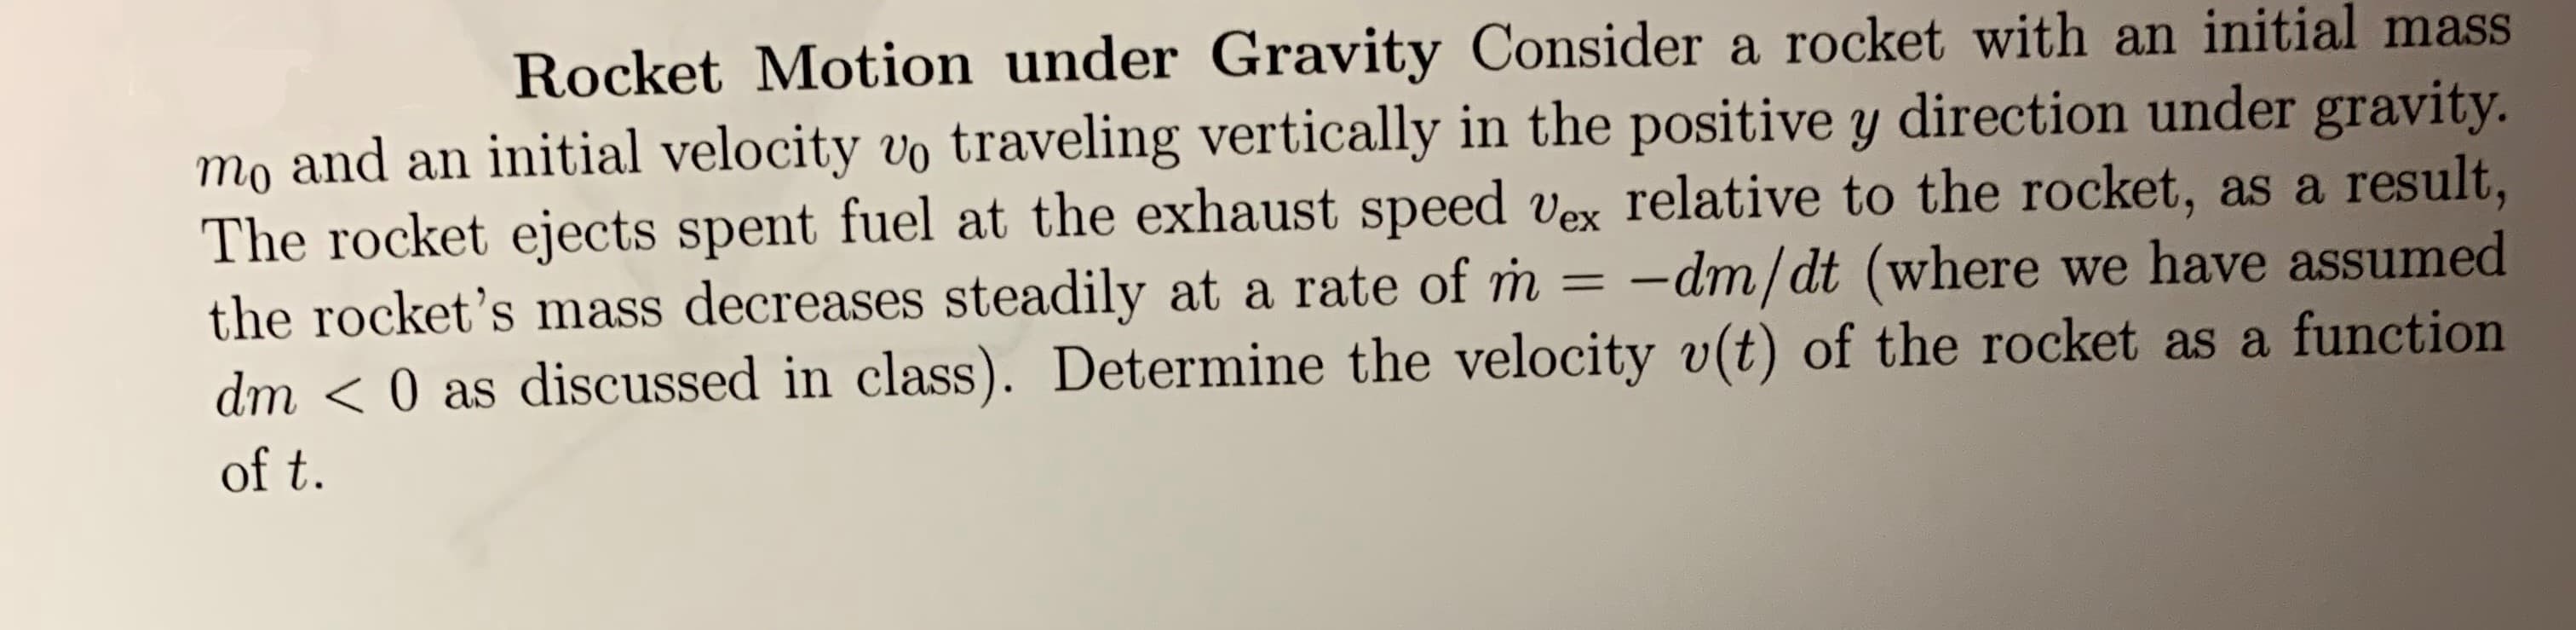 Rocket Motion under Gravity Consider a rocket with an initial mass
initial velocity vo traveling vertically in the positive y direction under gravity.
The rocket ejects spent fuel at the exhaust speed vex relative to the rocket, as a result,
m -dm/dt (where we have assumed
dm < 0 as discussed in class). Determine the velocity v(t) of the rocket as a function
mo and an
the rocket's mass decreases steadily at a rate of rn
of t.
